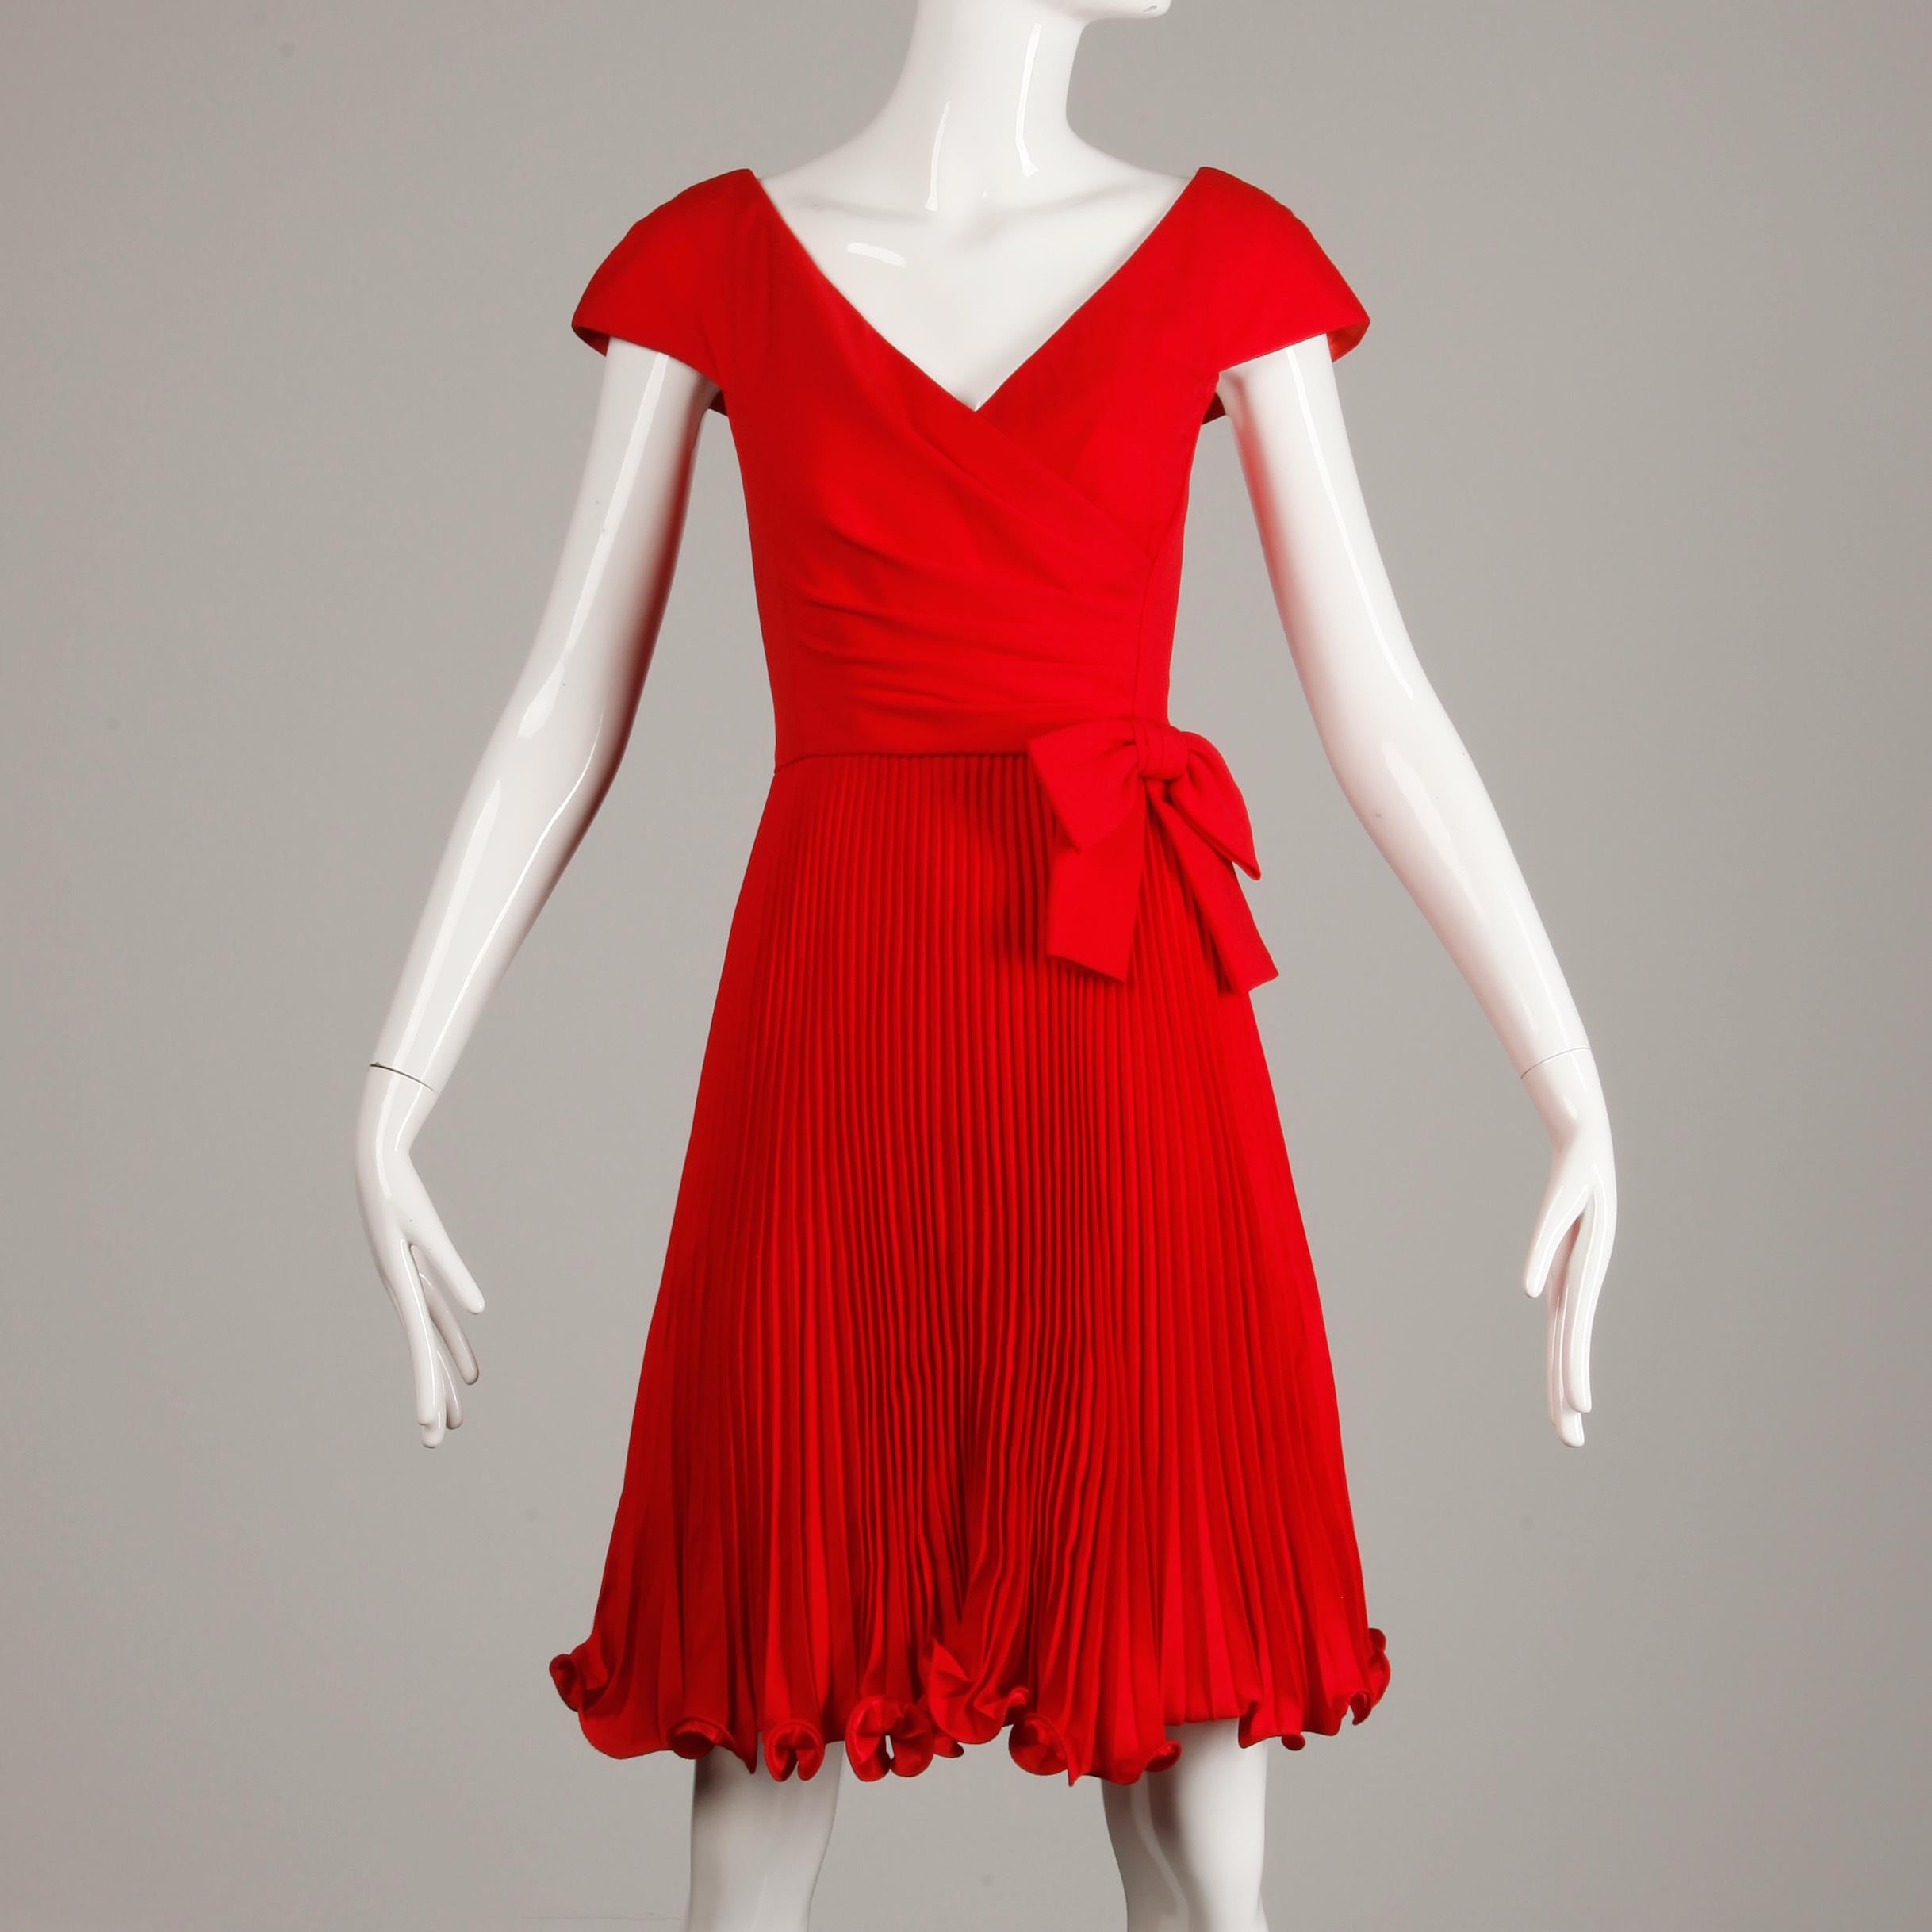 1990s Arnold Scaasi Vintage Red Accordian Pleated Cocktail Dress with Bow Detail 1